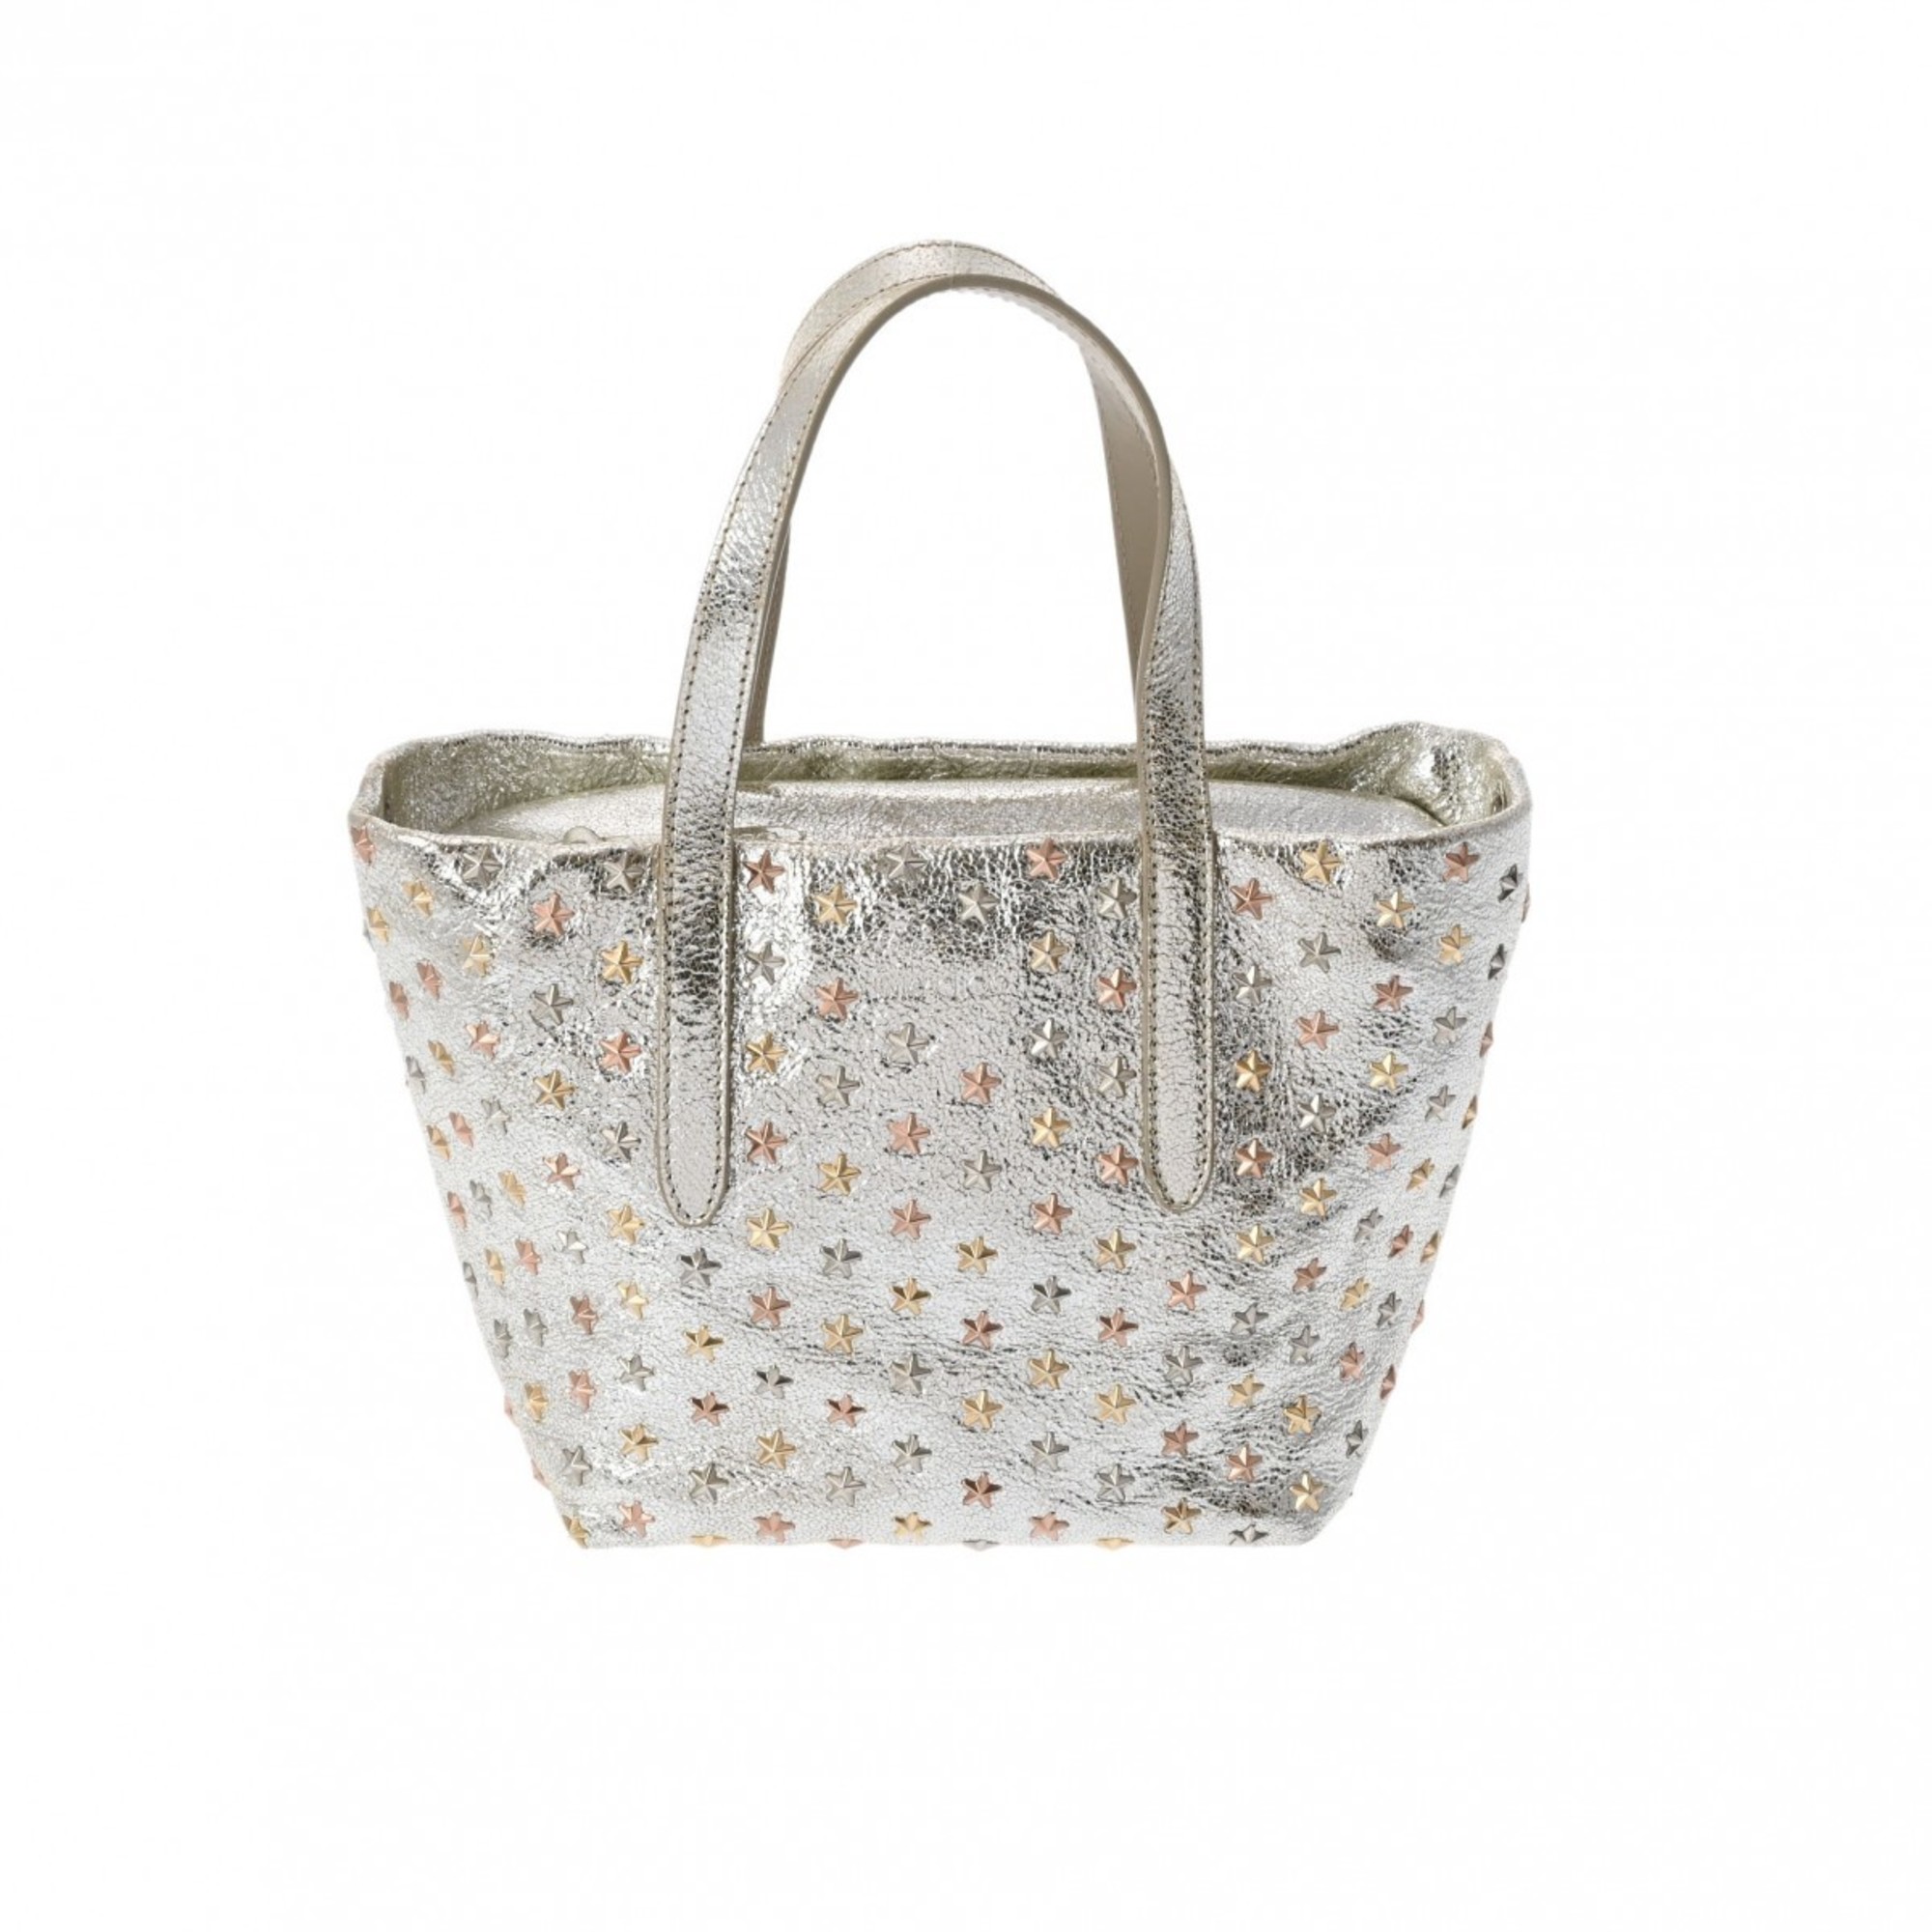 JIMMY CHOO Sarah Star Studded Silver Women's Leather Tote Bag